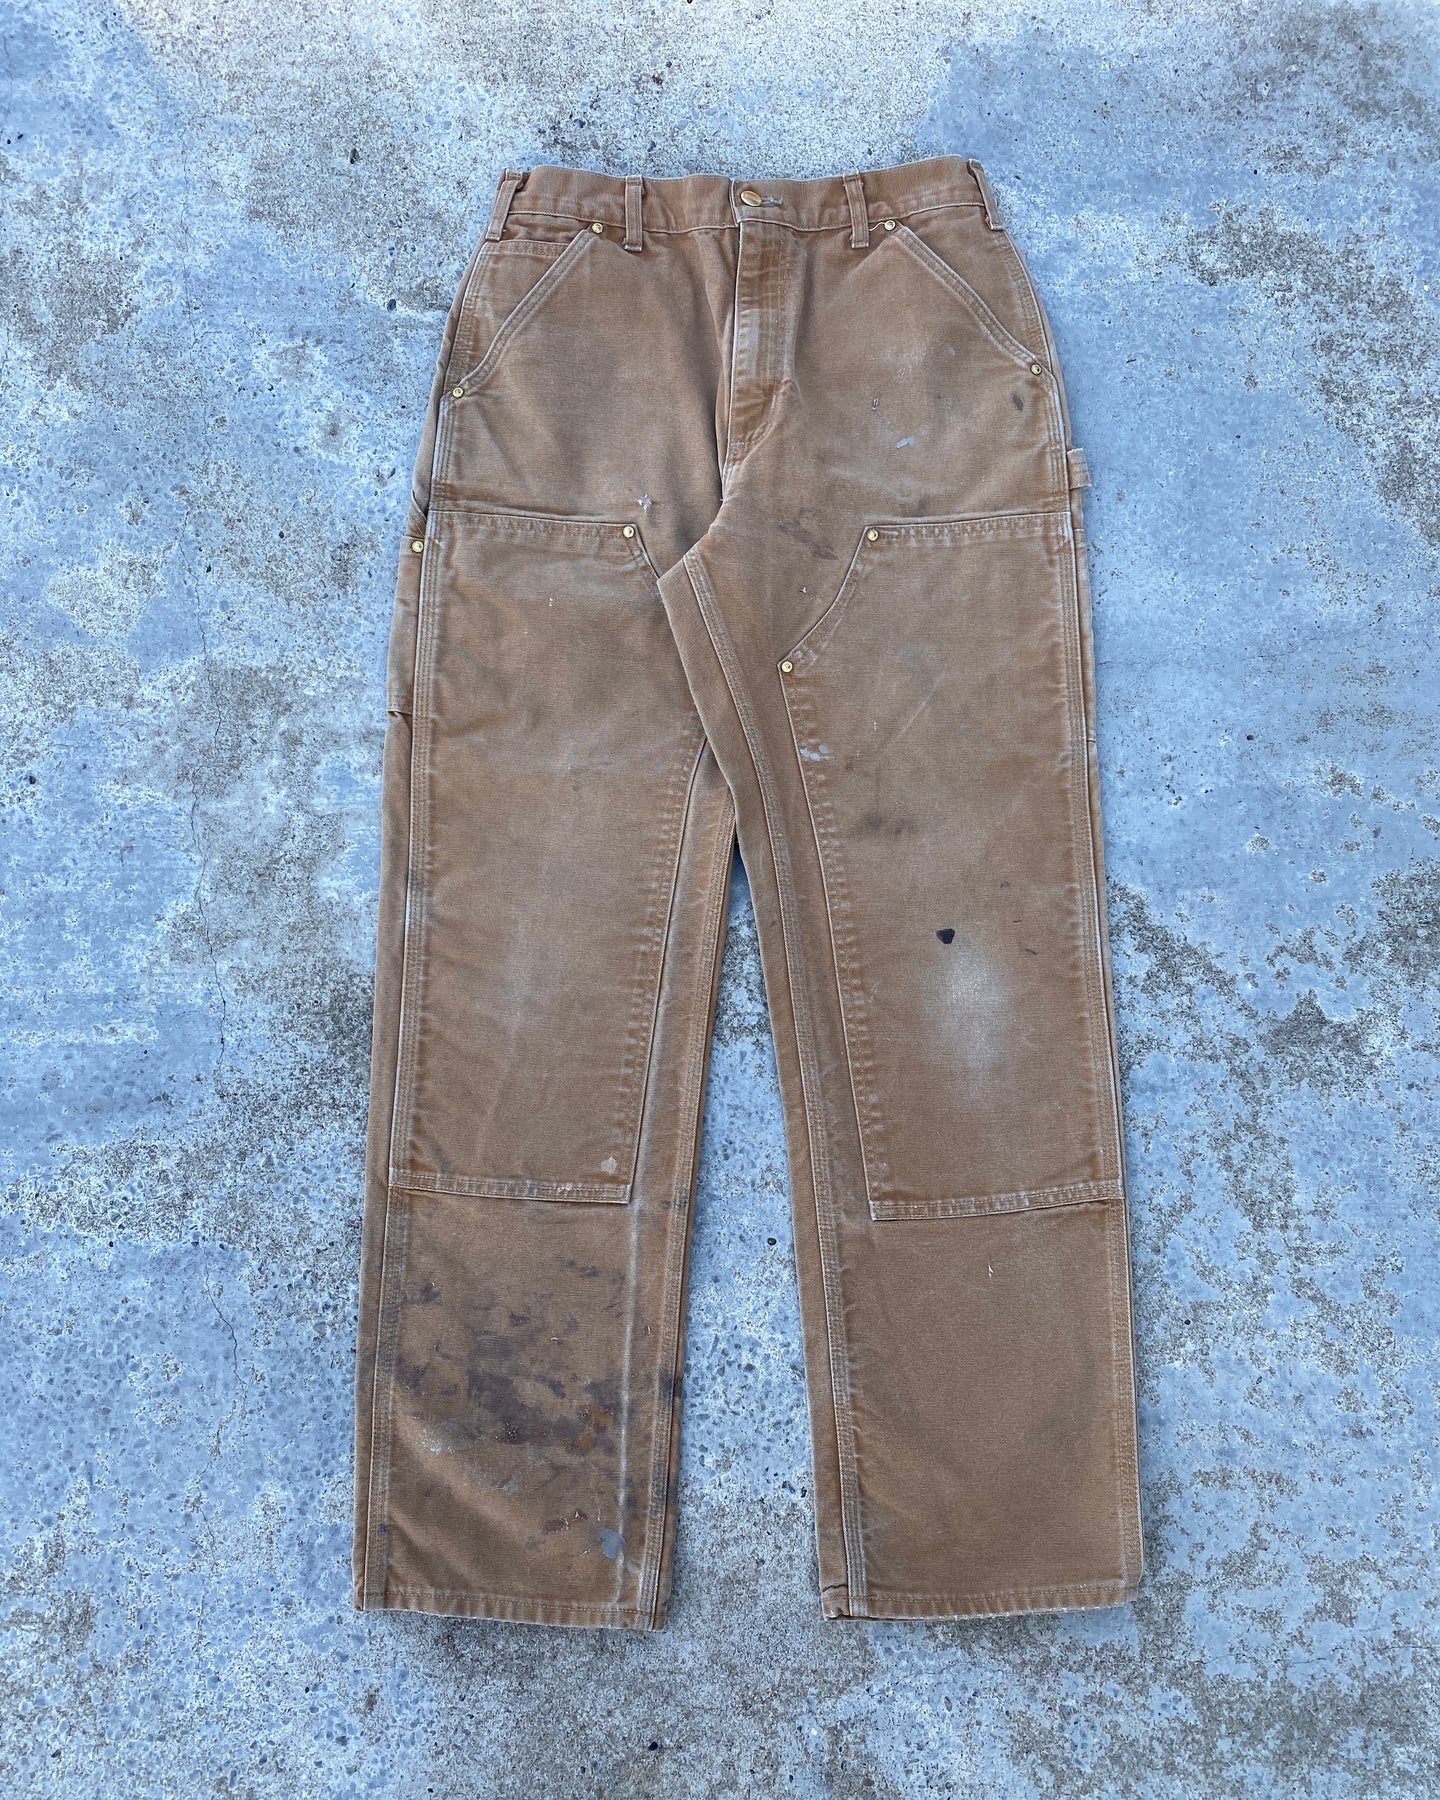 1990s Carhartt Thrashed Double Knee Pants - Size 31 x 31